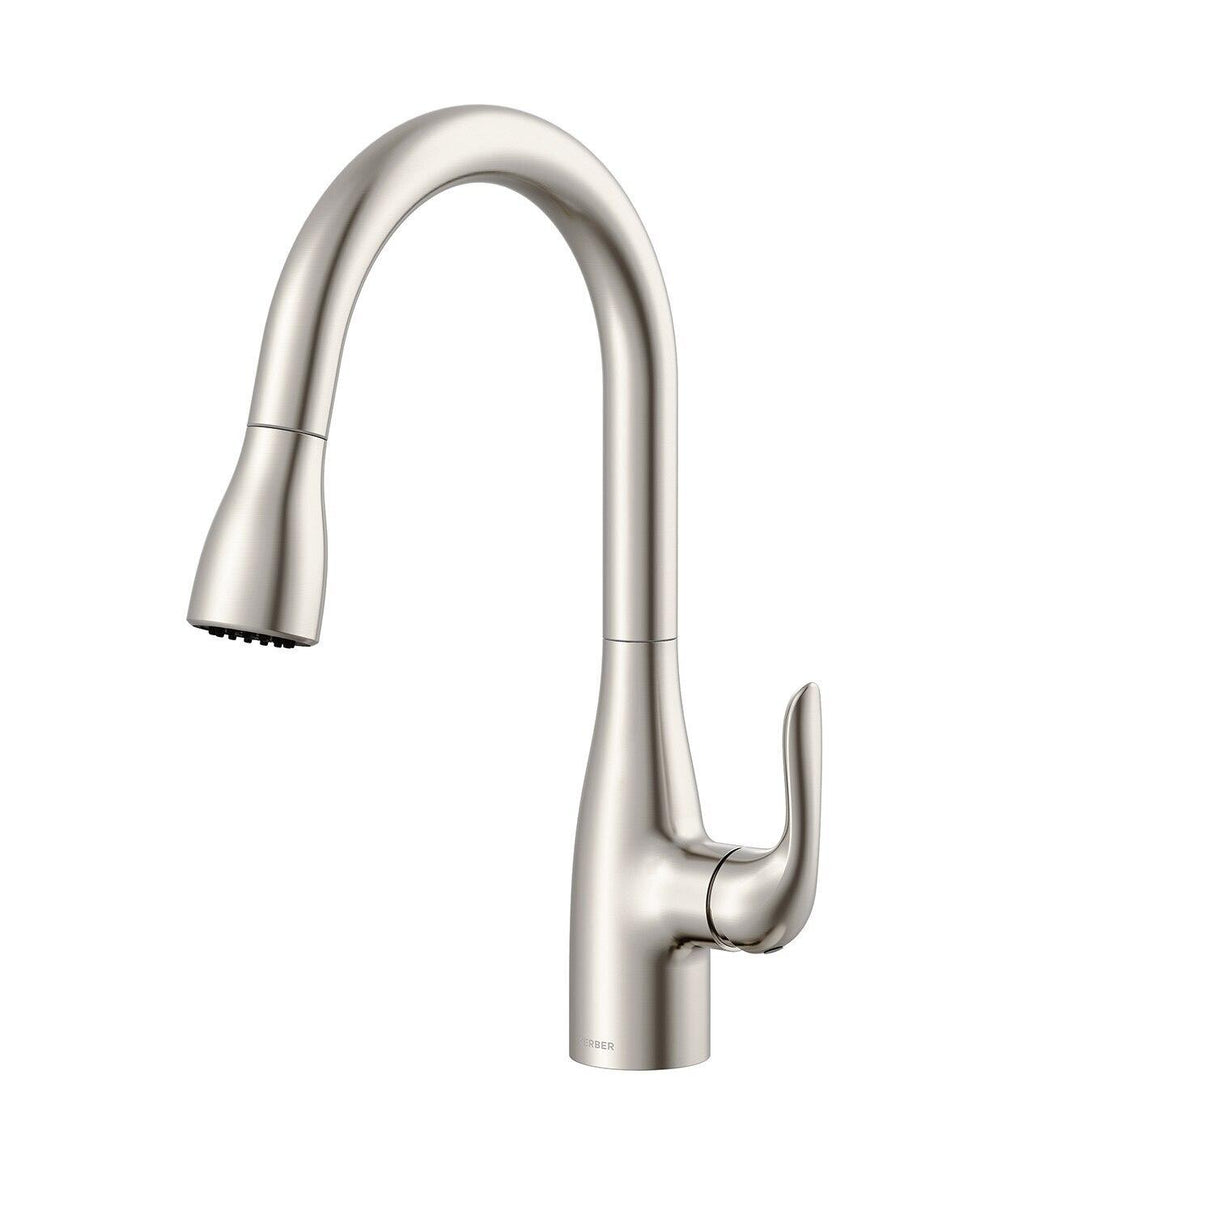 Gerber G0040164 Viper Single Handle Pull-down Kitchen Faucet - Chrome